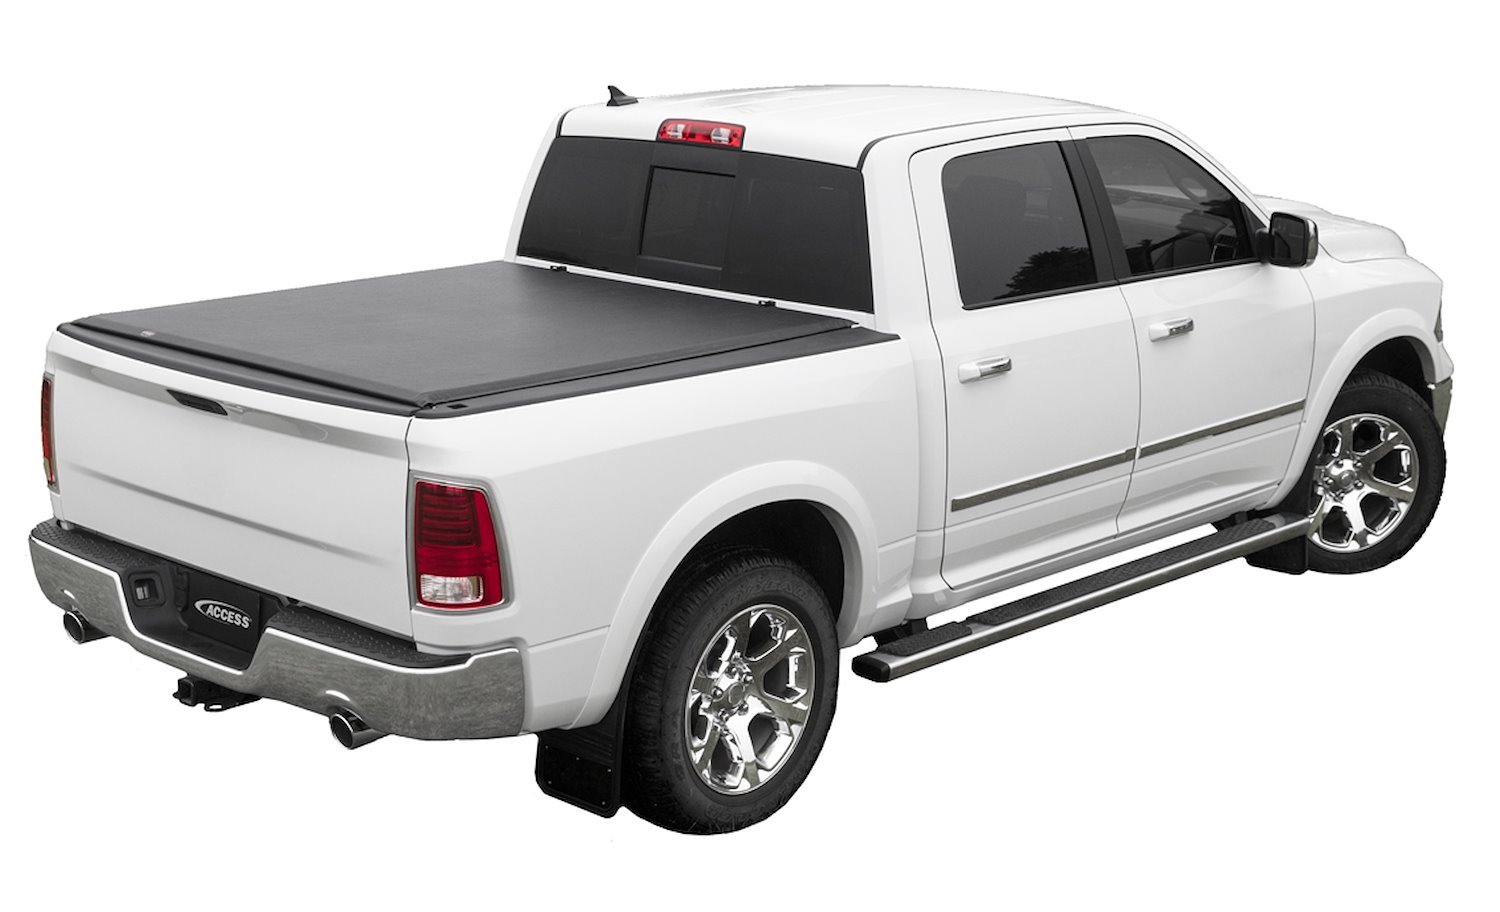 LORADO Roll-Up Tonneau Cover, Fits Select Ram 1500/Classic, with 5 ft. 7 in. Bed w/RamBed